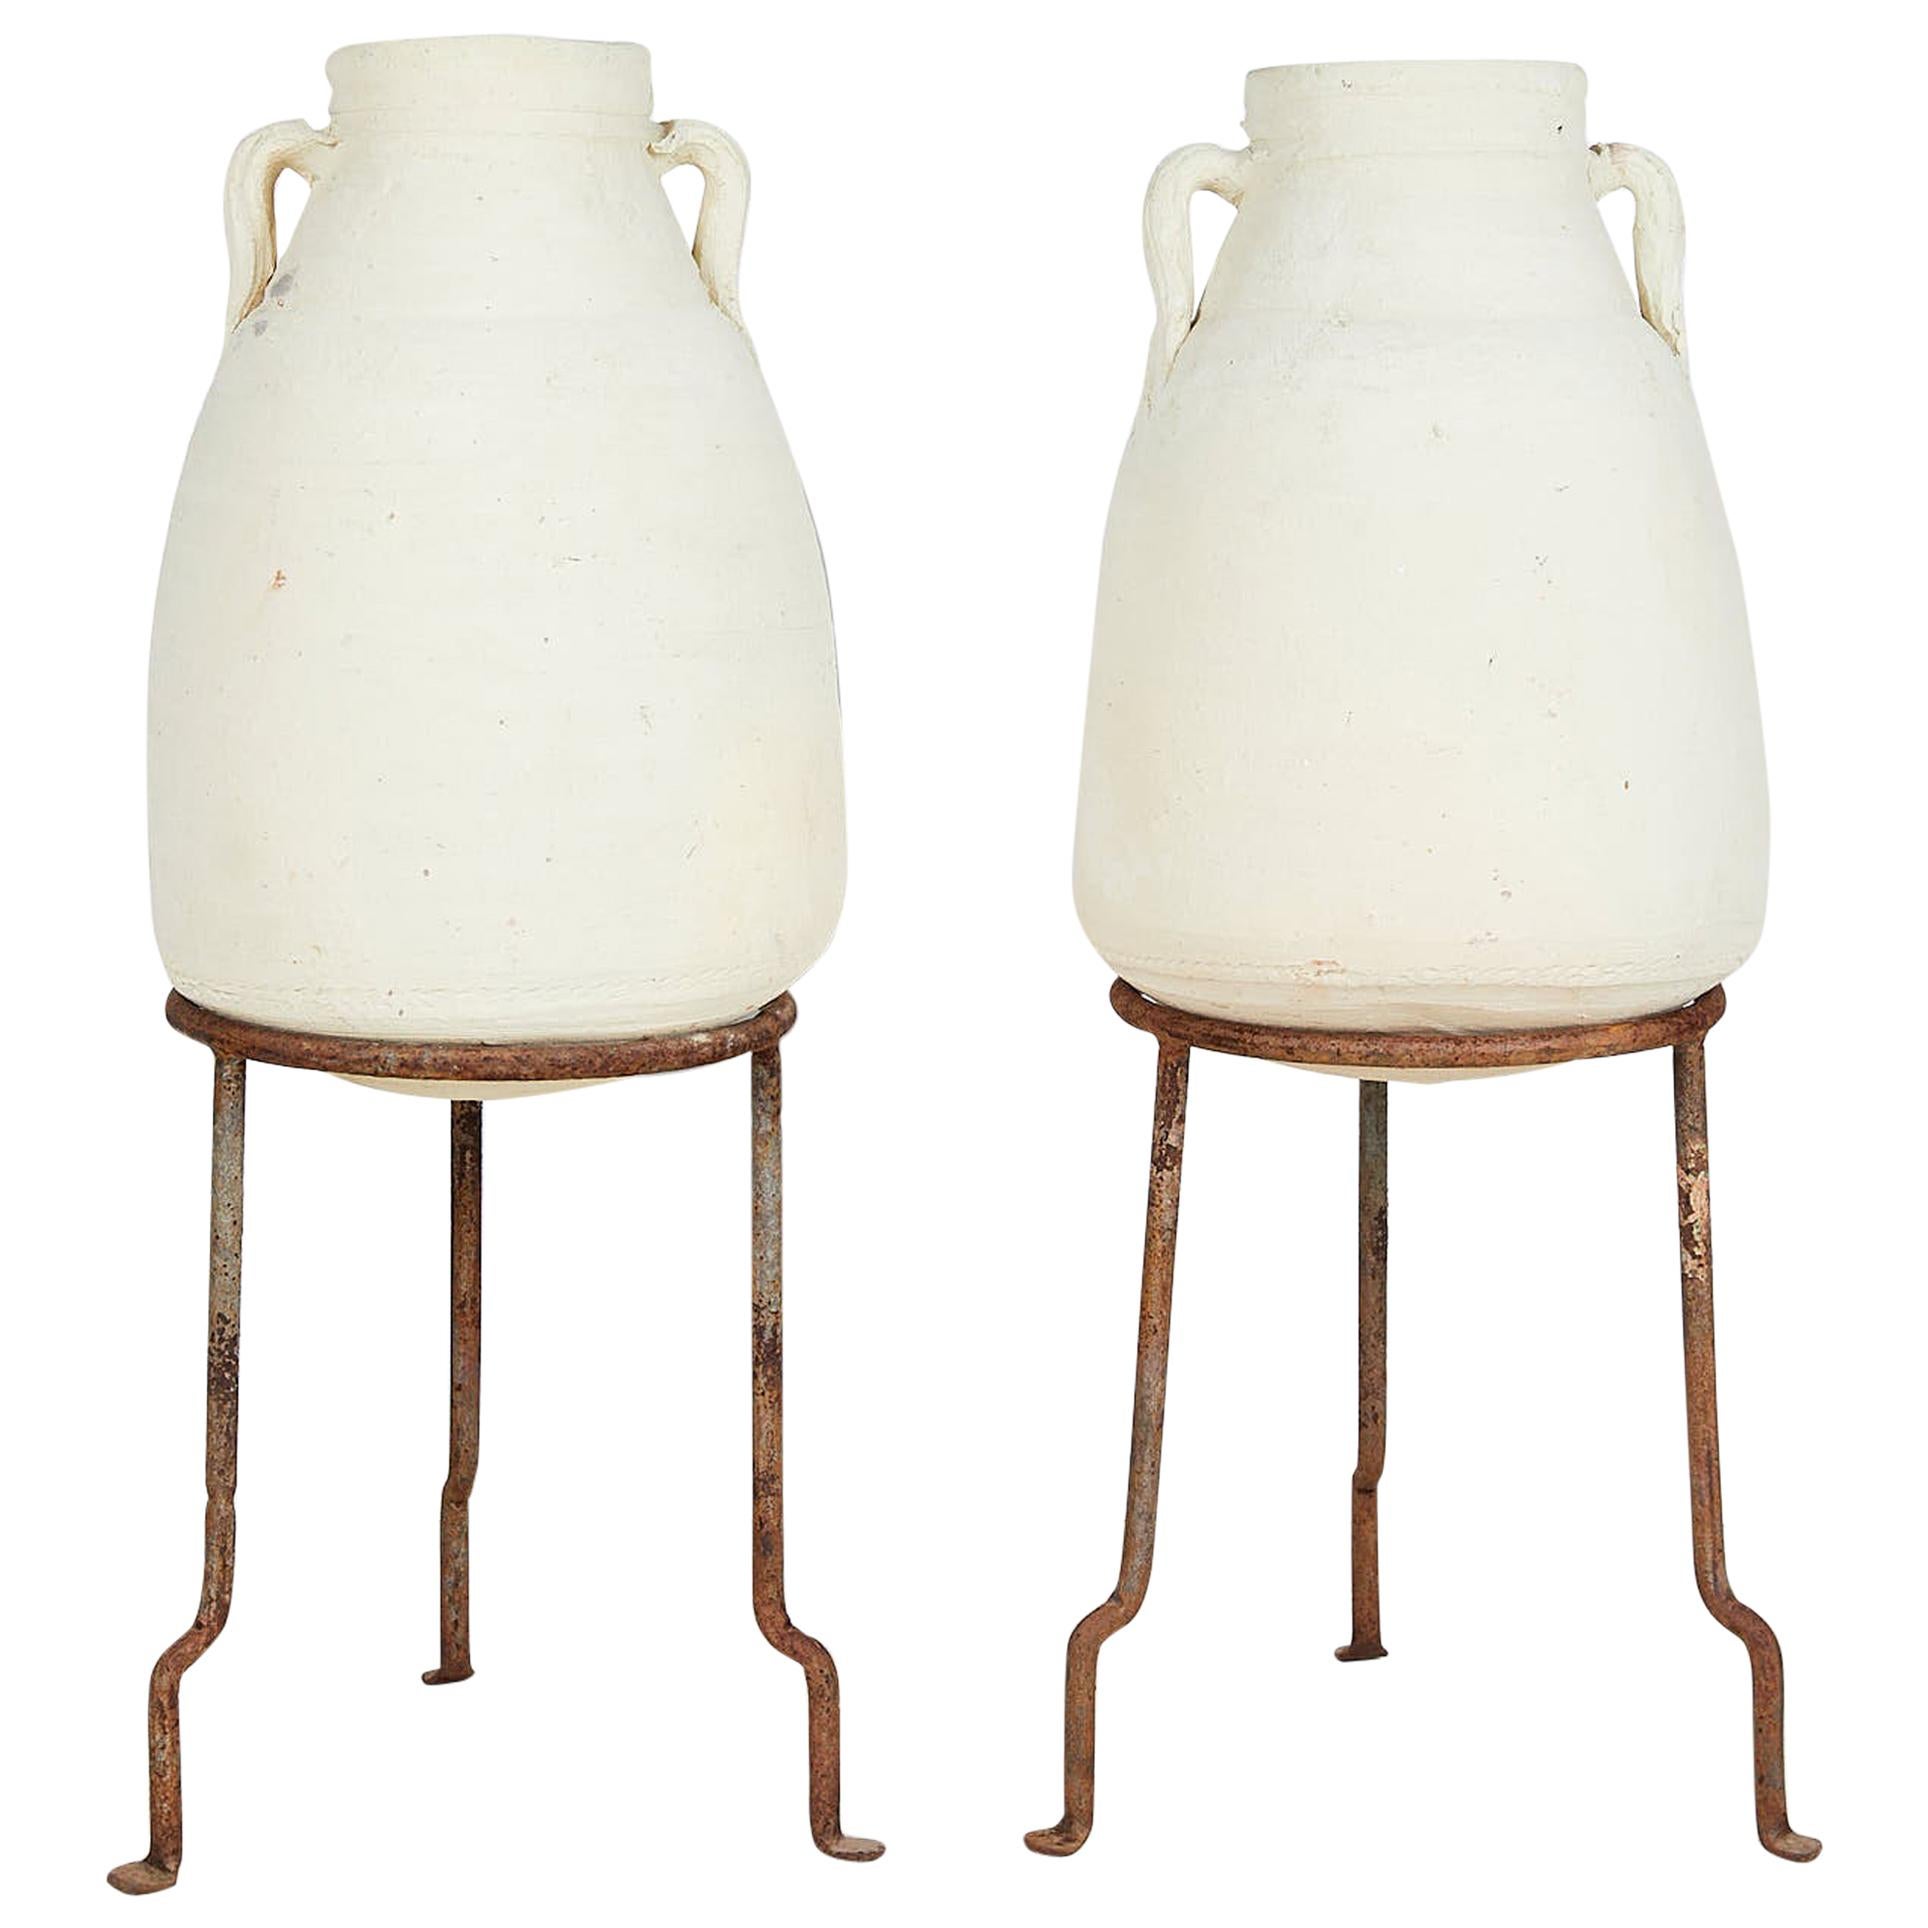 Pair of Vintage Mediterranean White Clay Vessels on Forged Iron Stands